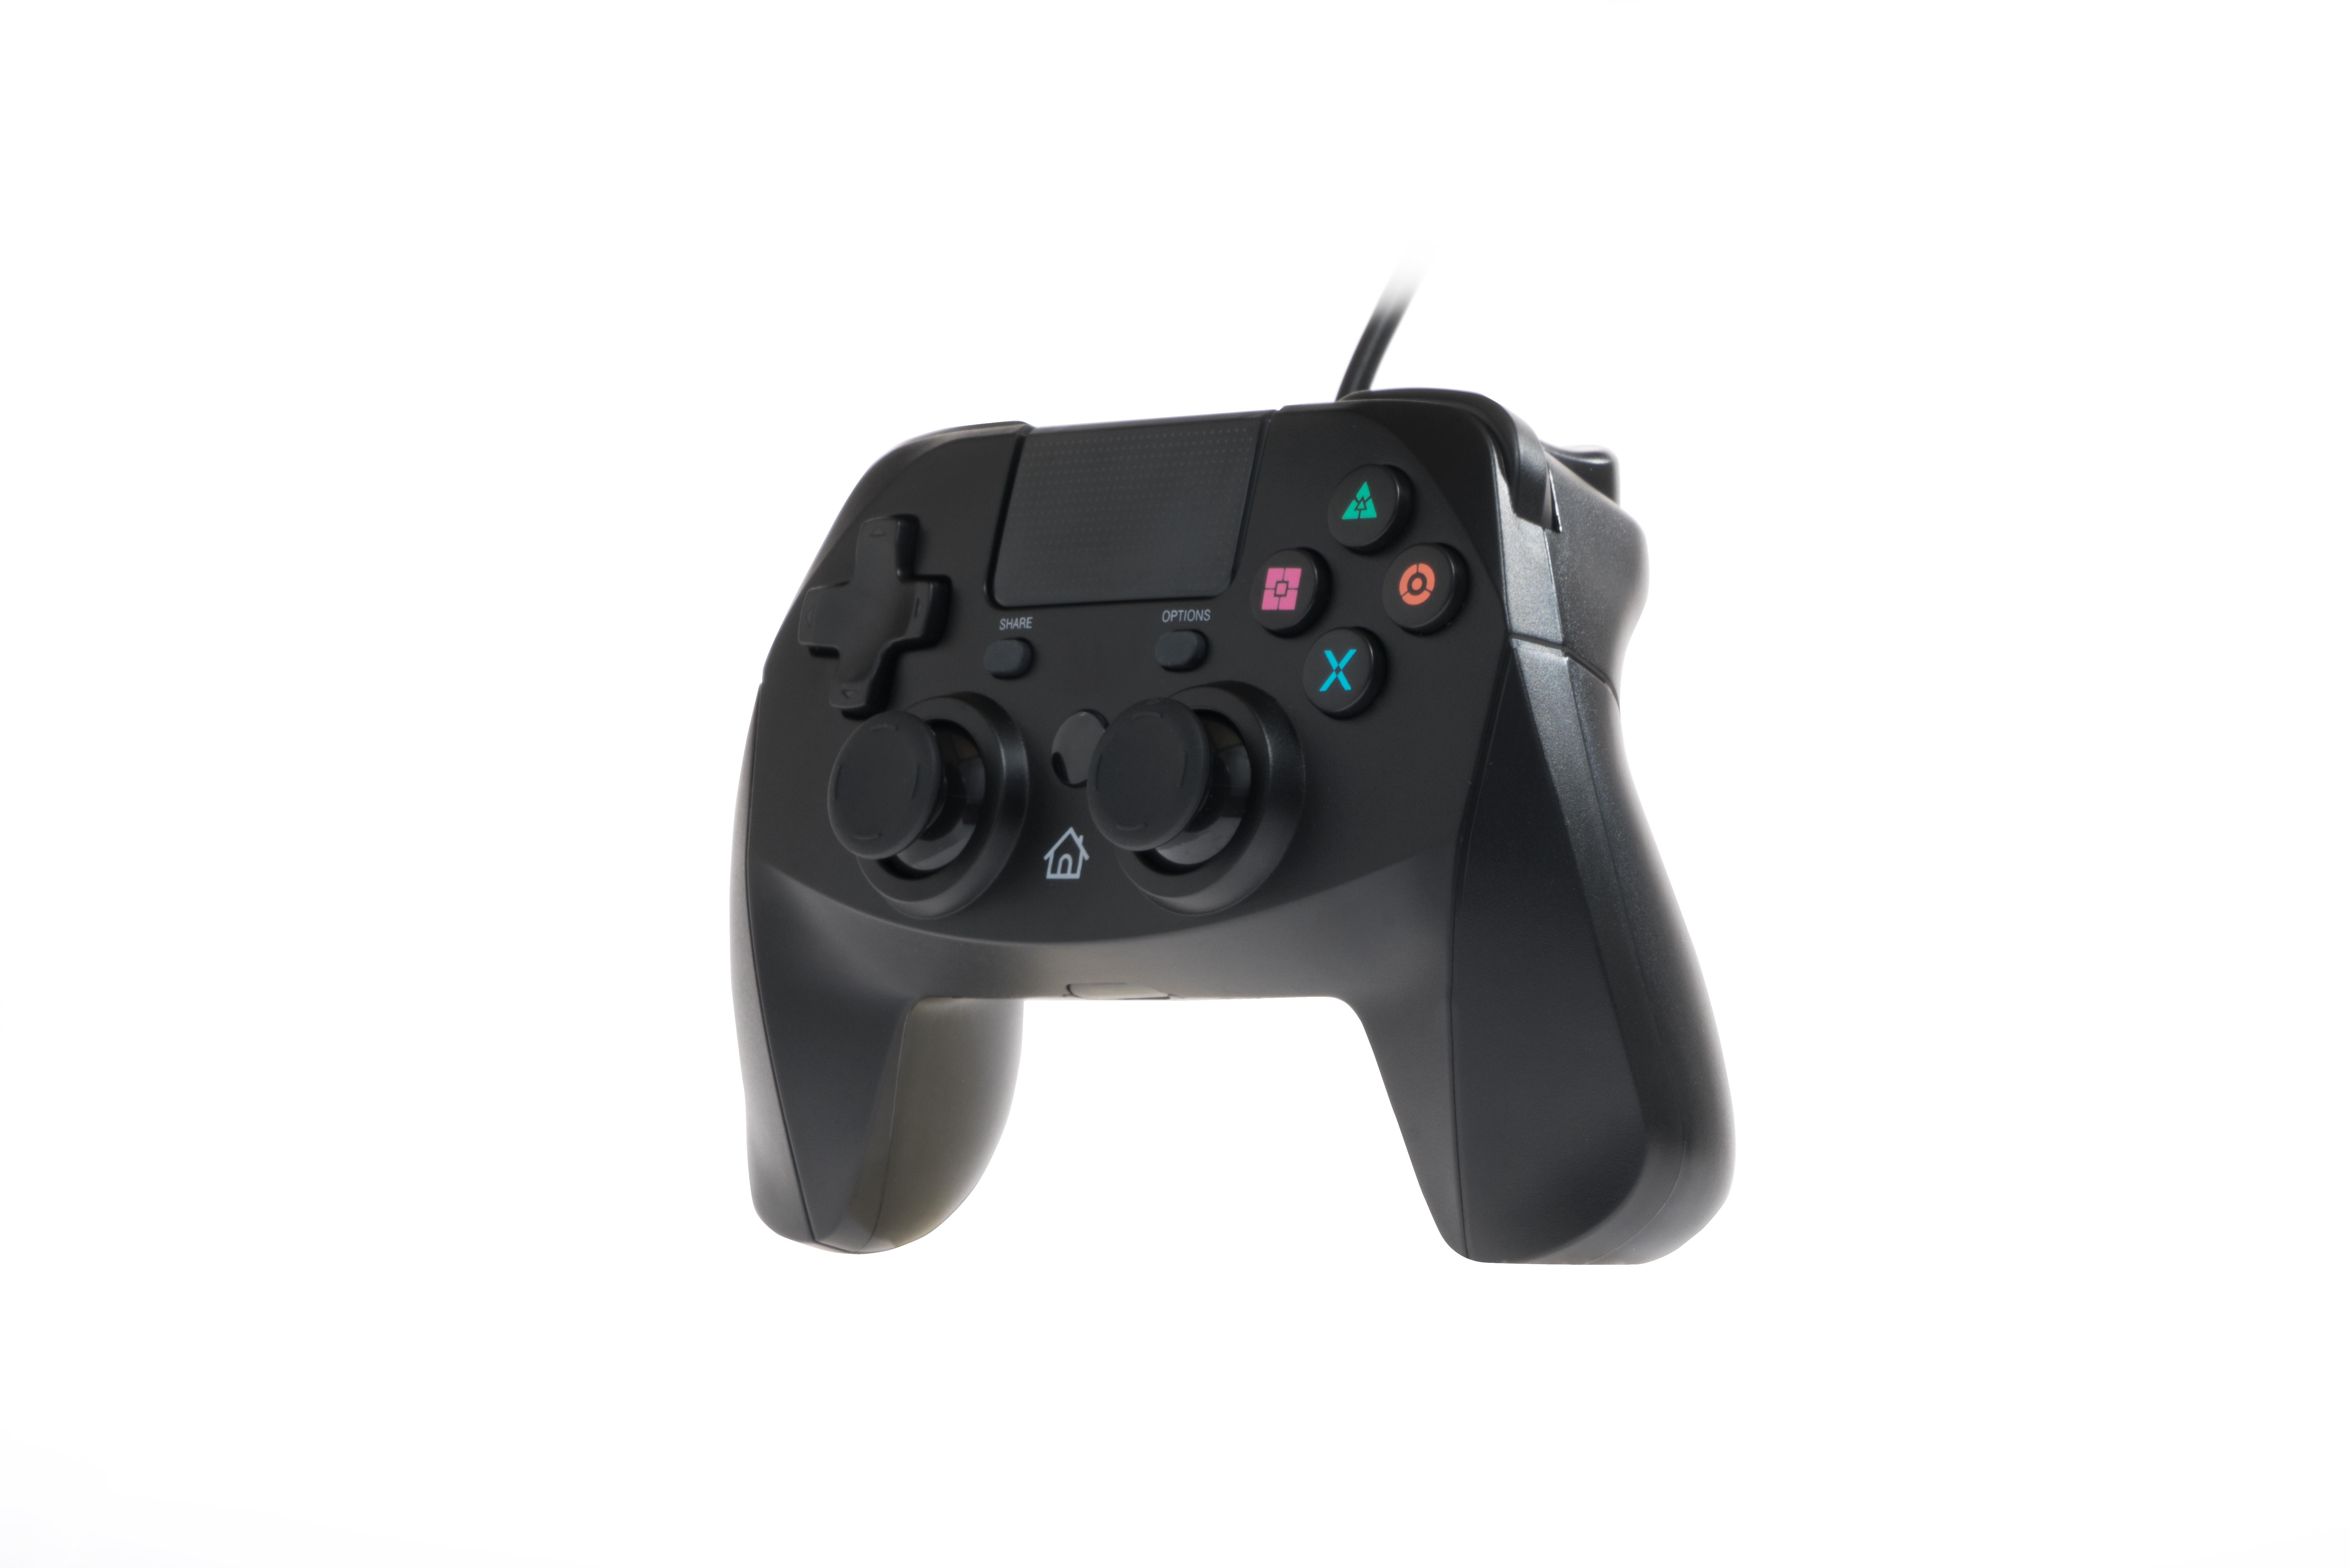 snakebyte ps3 controller on pc driver